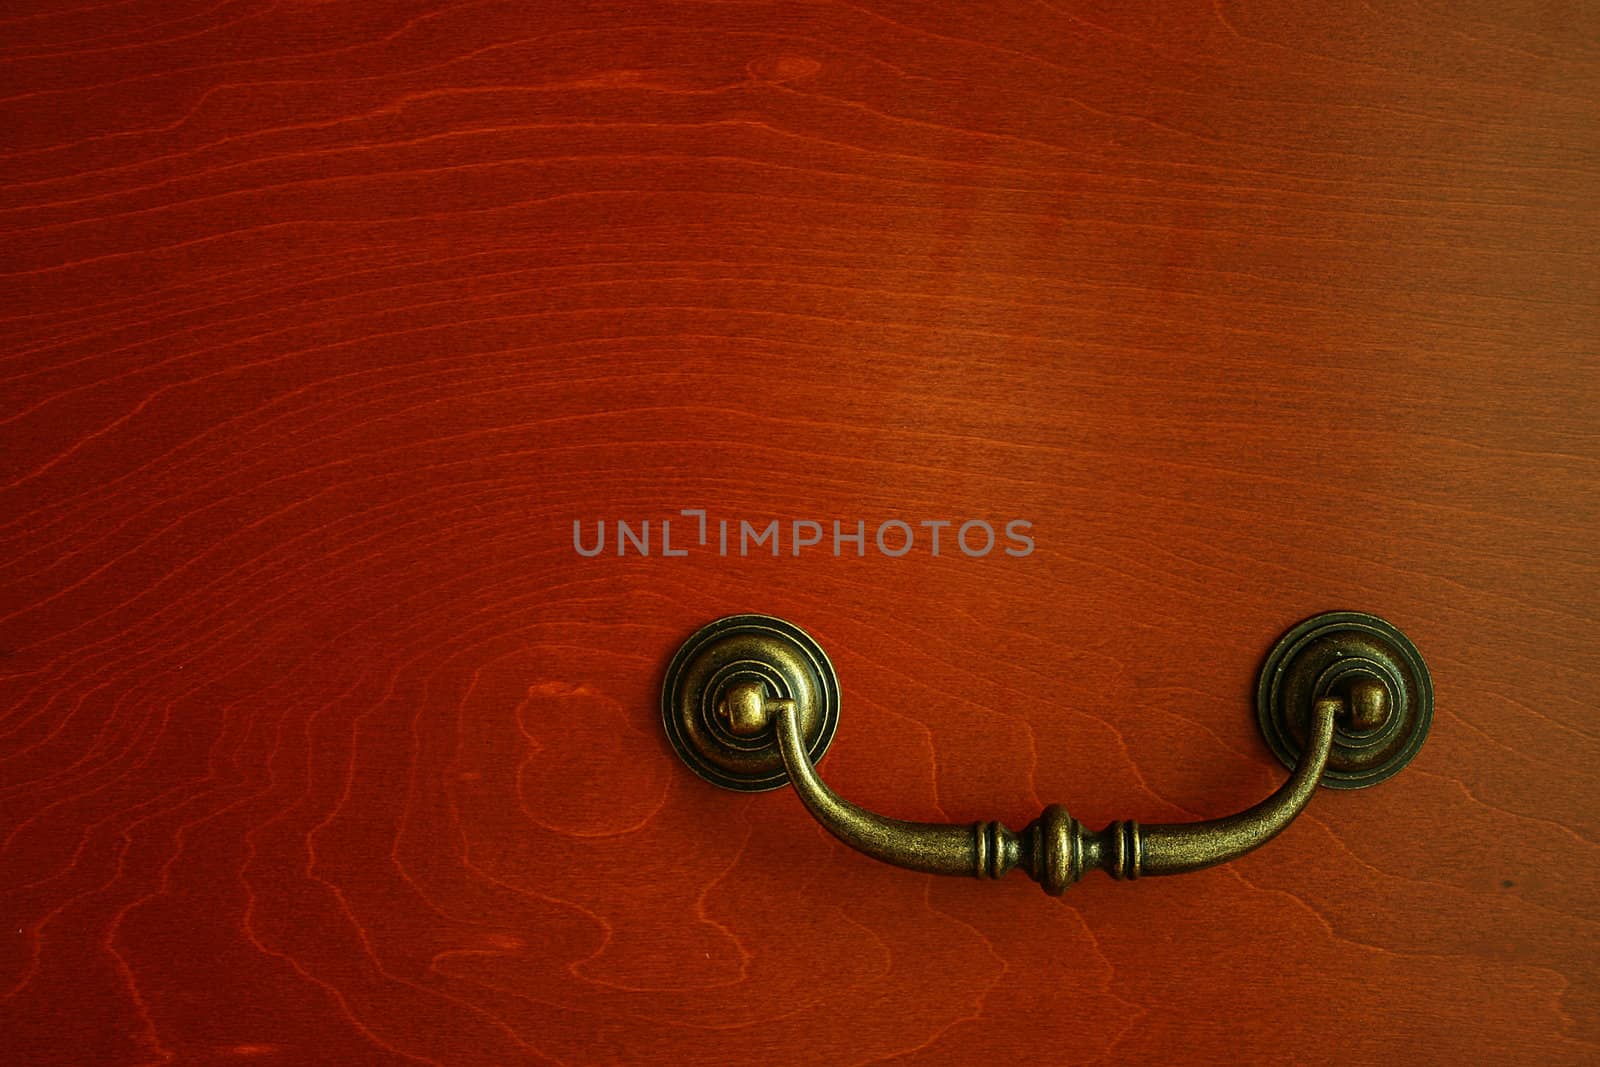 The ancient handle on a case door, as an element of design of an interior of apartment.